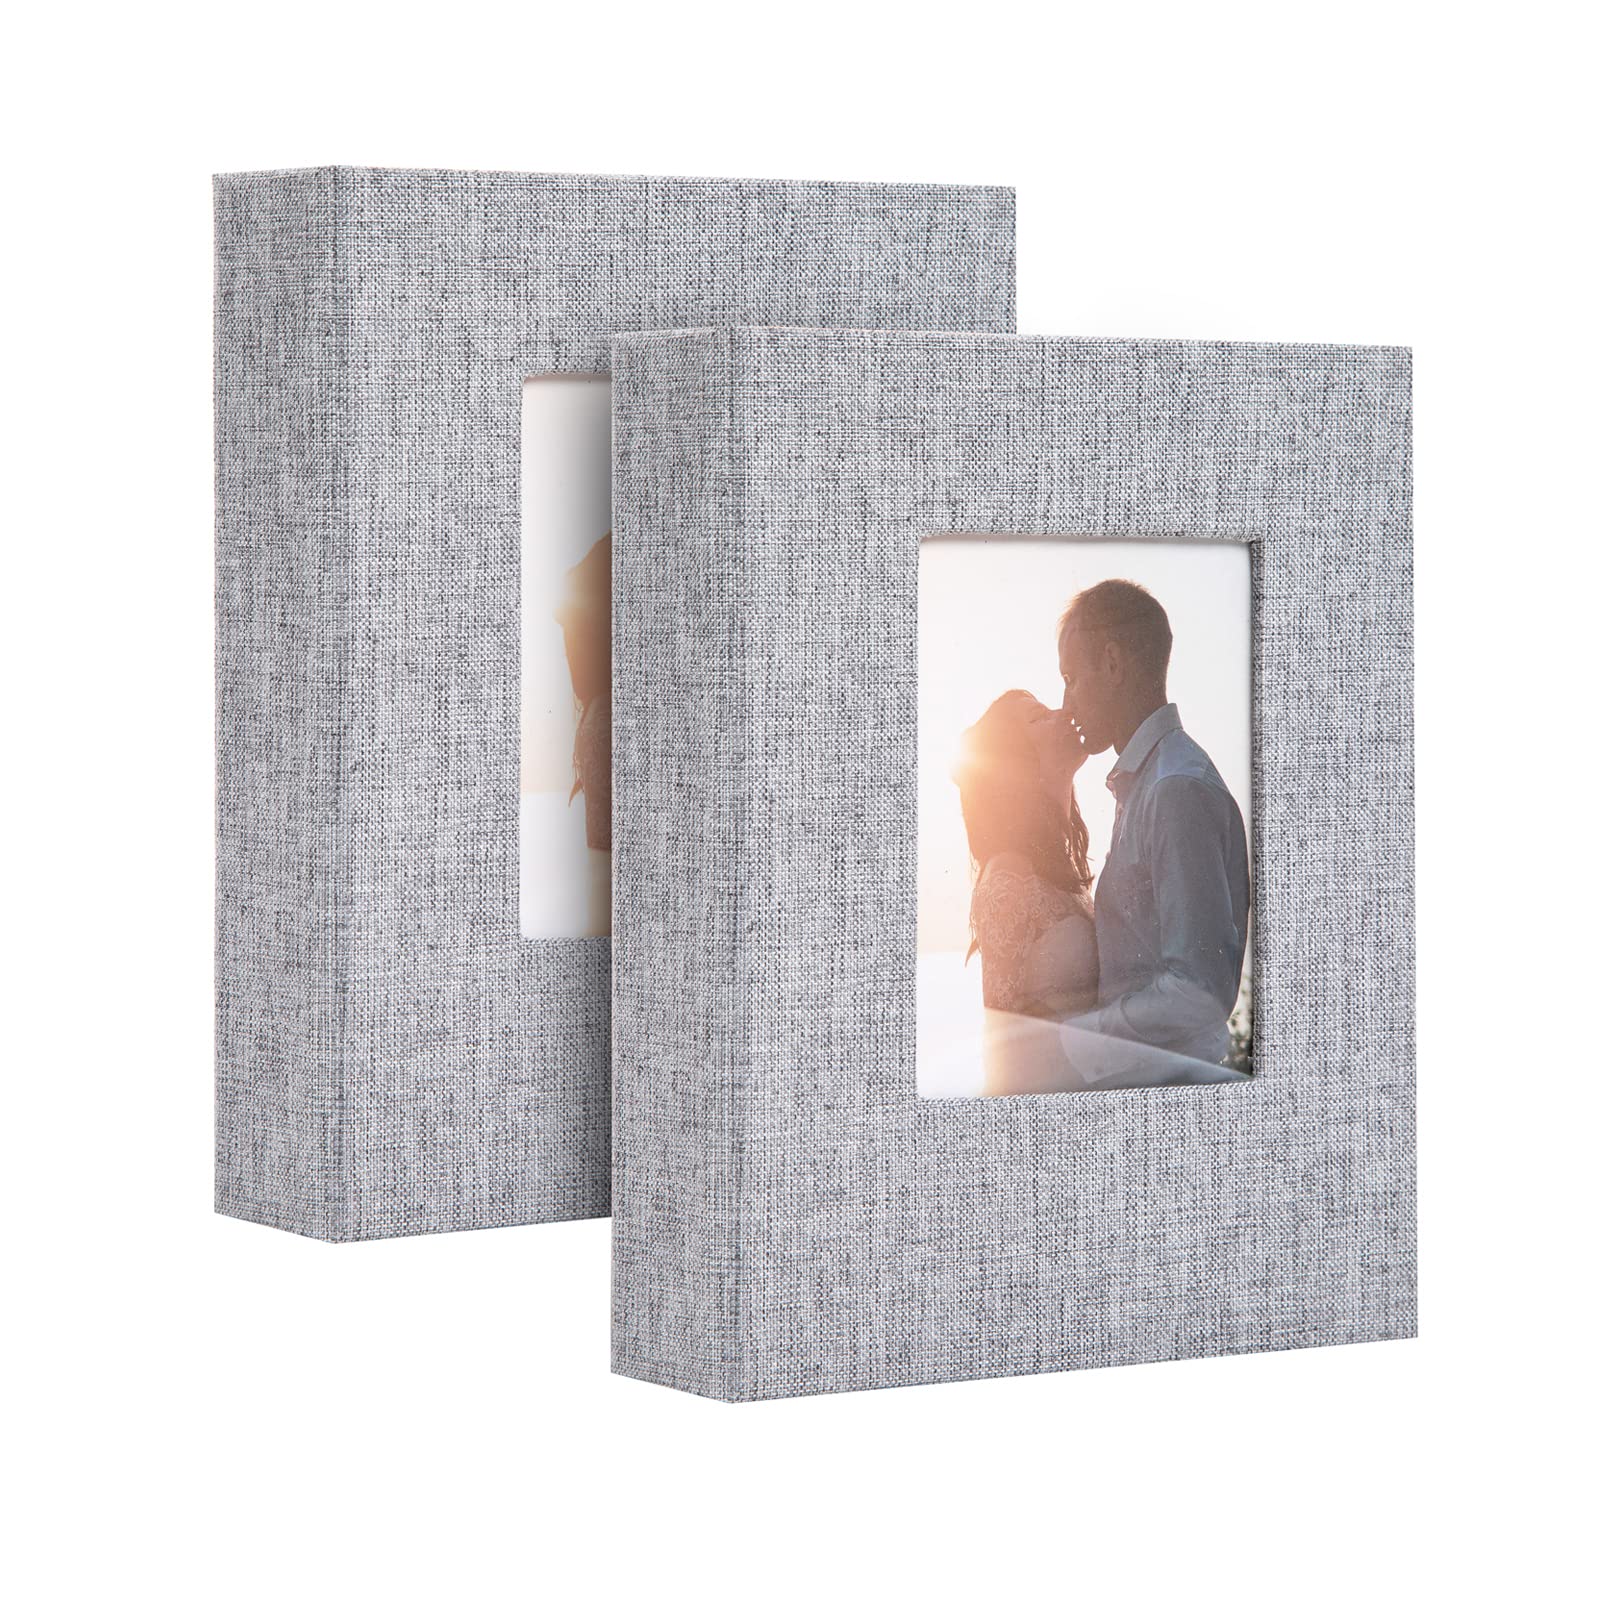 Large Photo Album Self Adhesive 3x5 4x6 5x7 13.2x12.8 inches 40 Pages Black